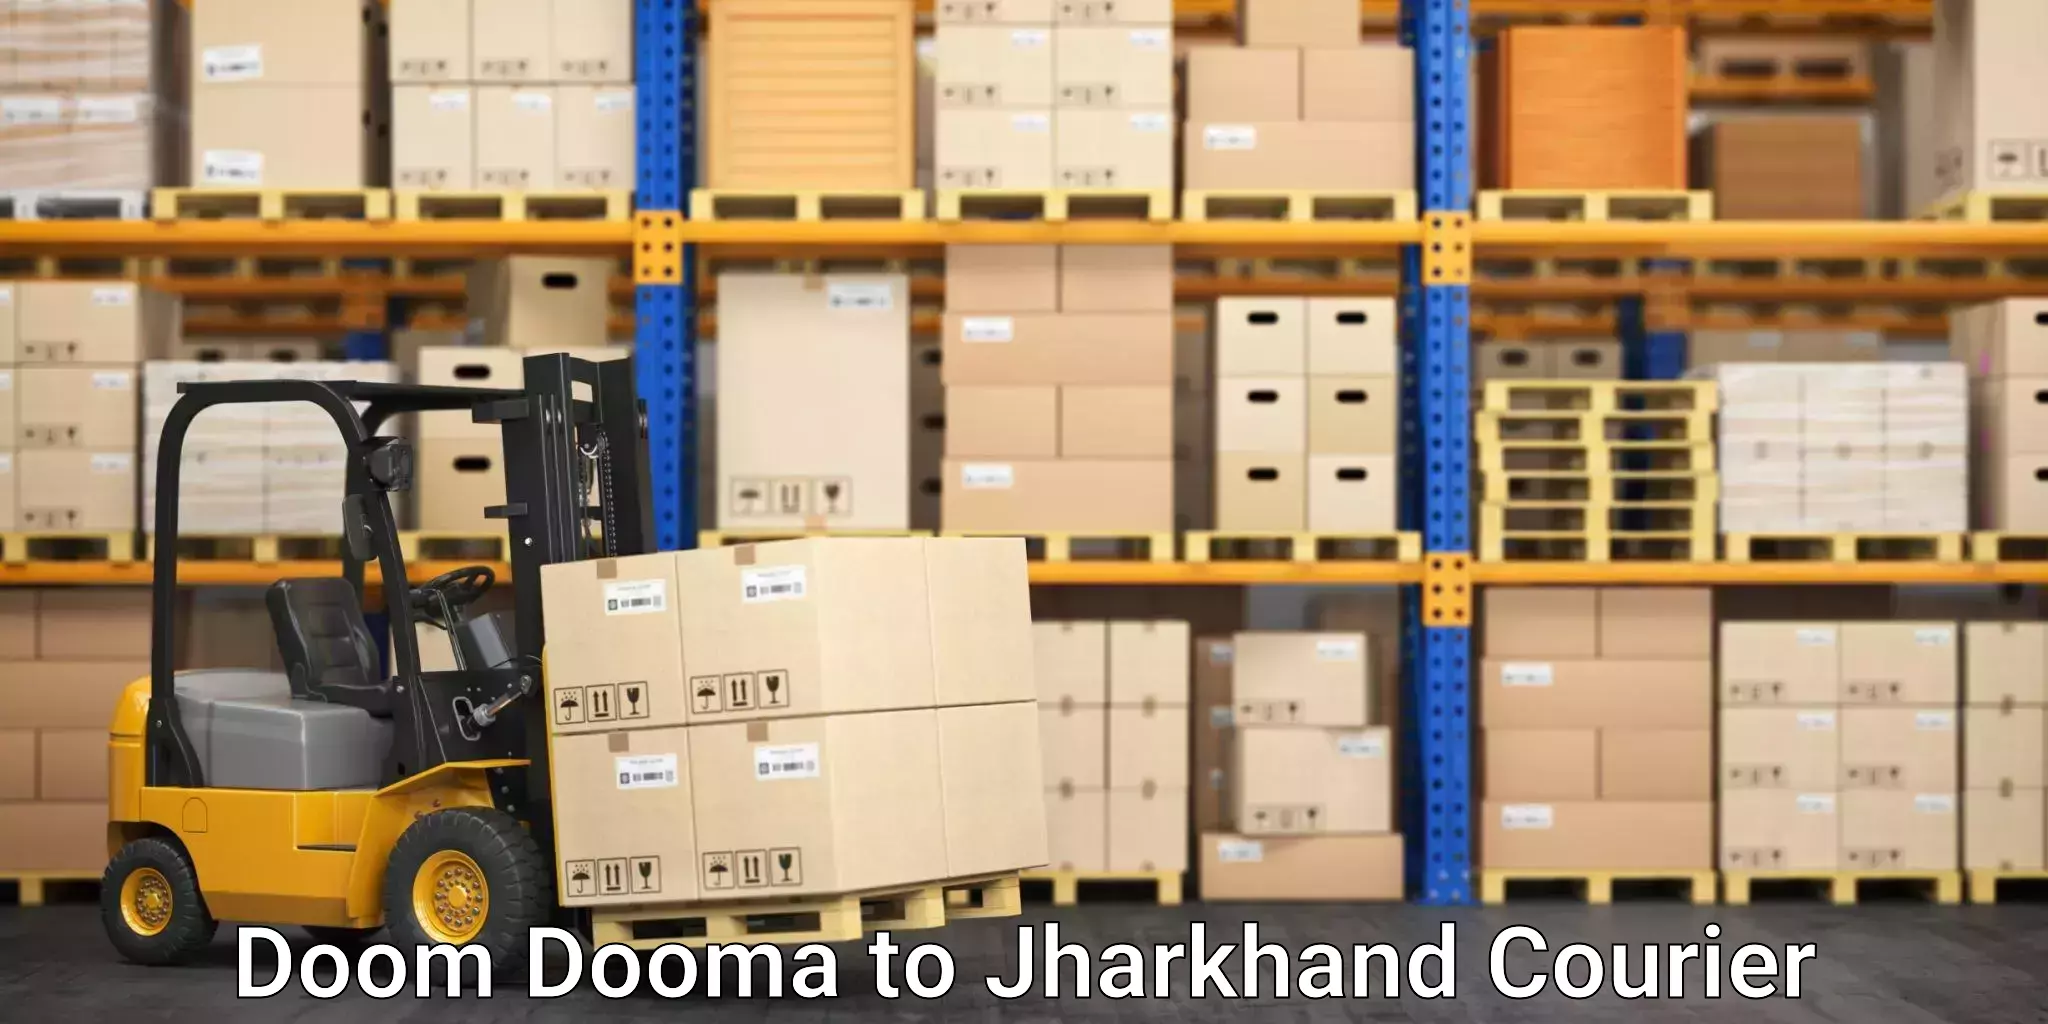 Reliable package handling Doom Dooma to Tandwa